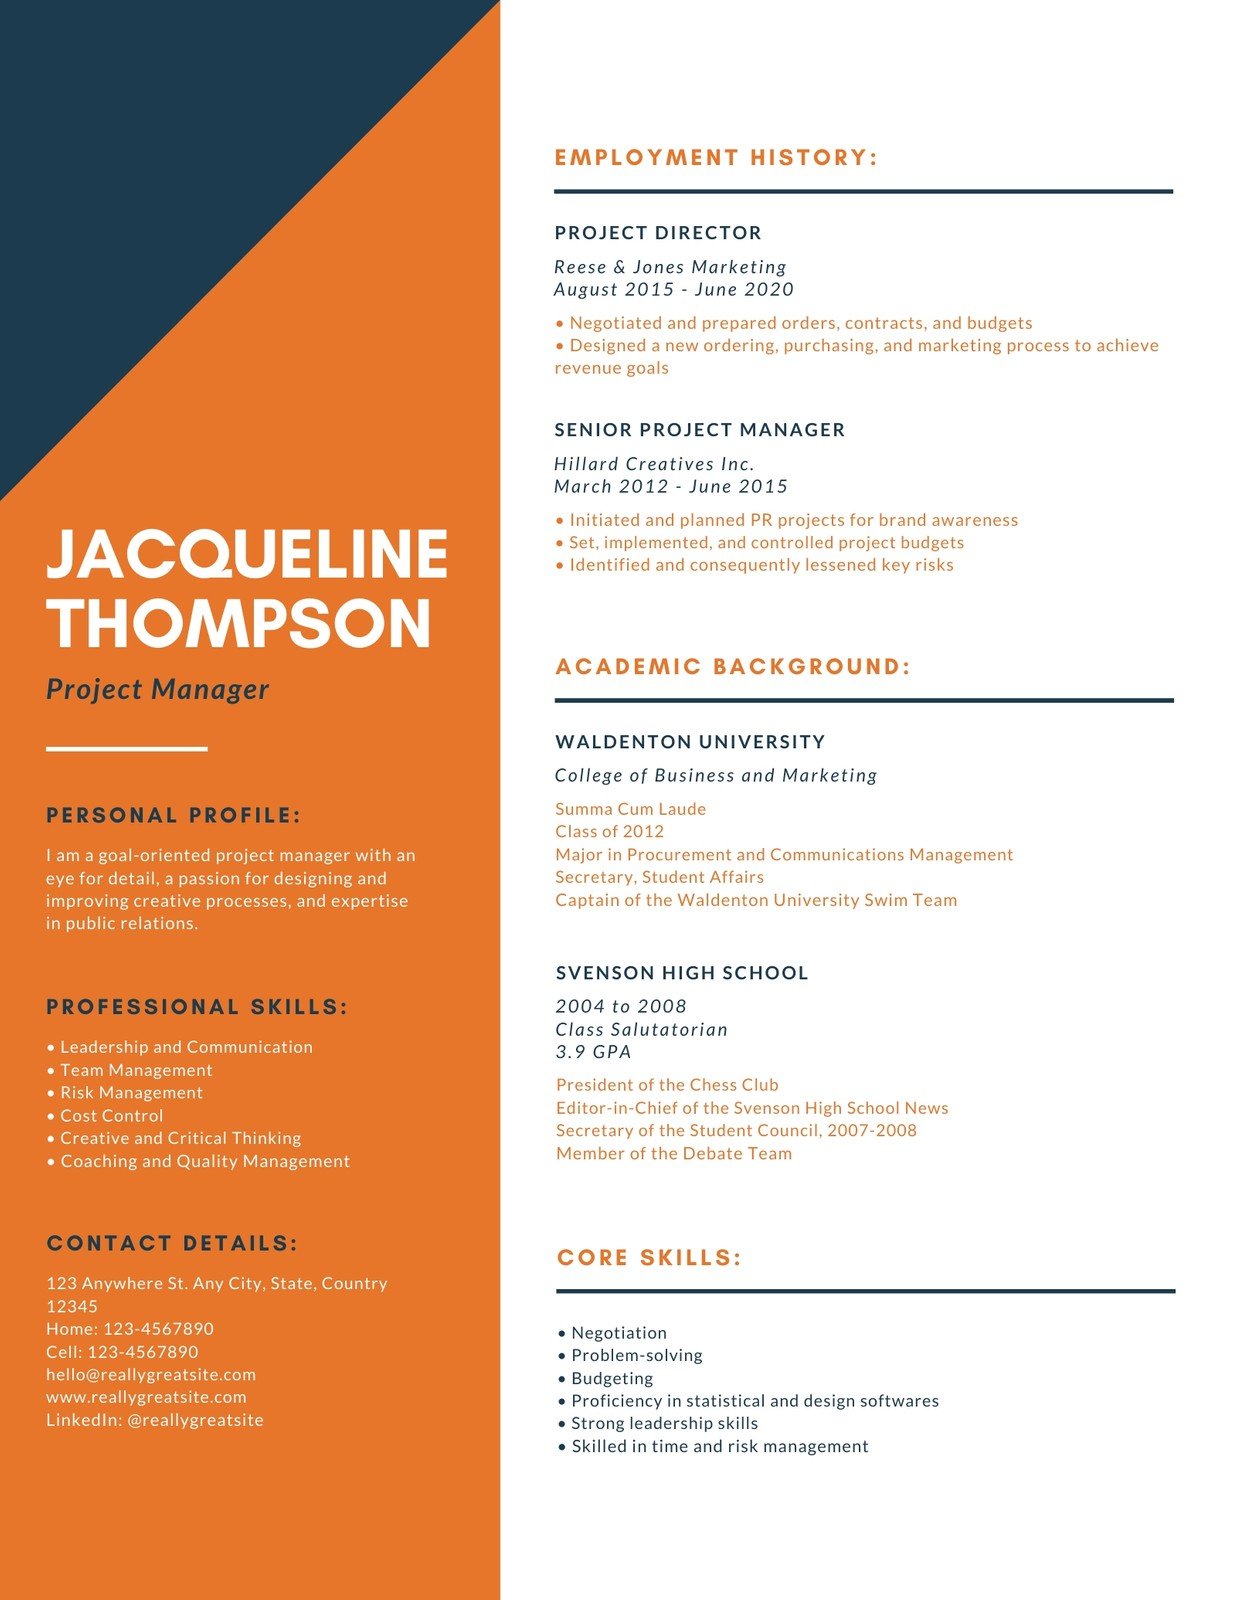 Orange and White Simple Sidebar Corporate Resume Templates by Canva